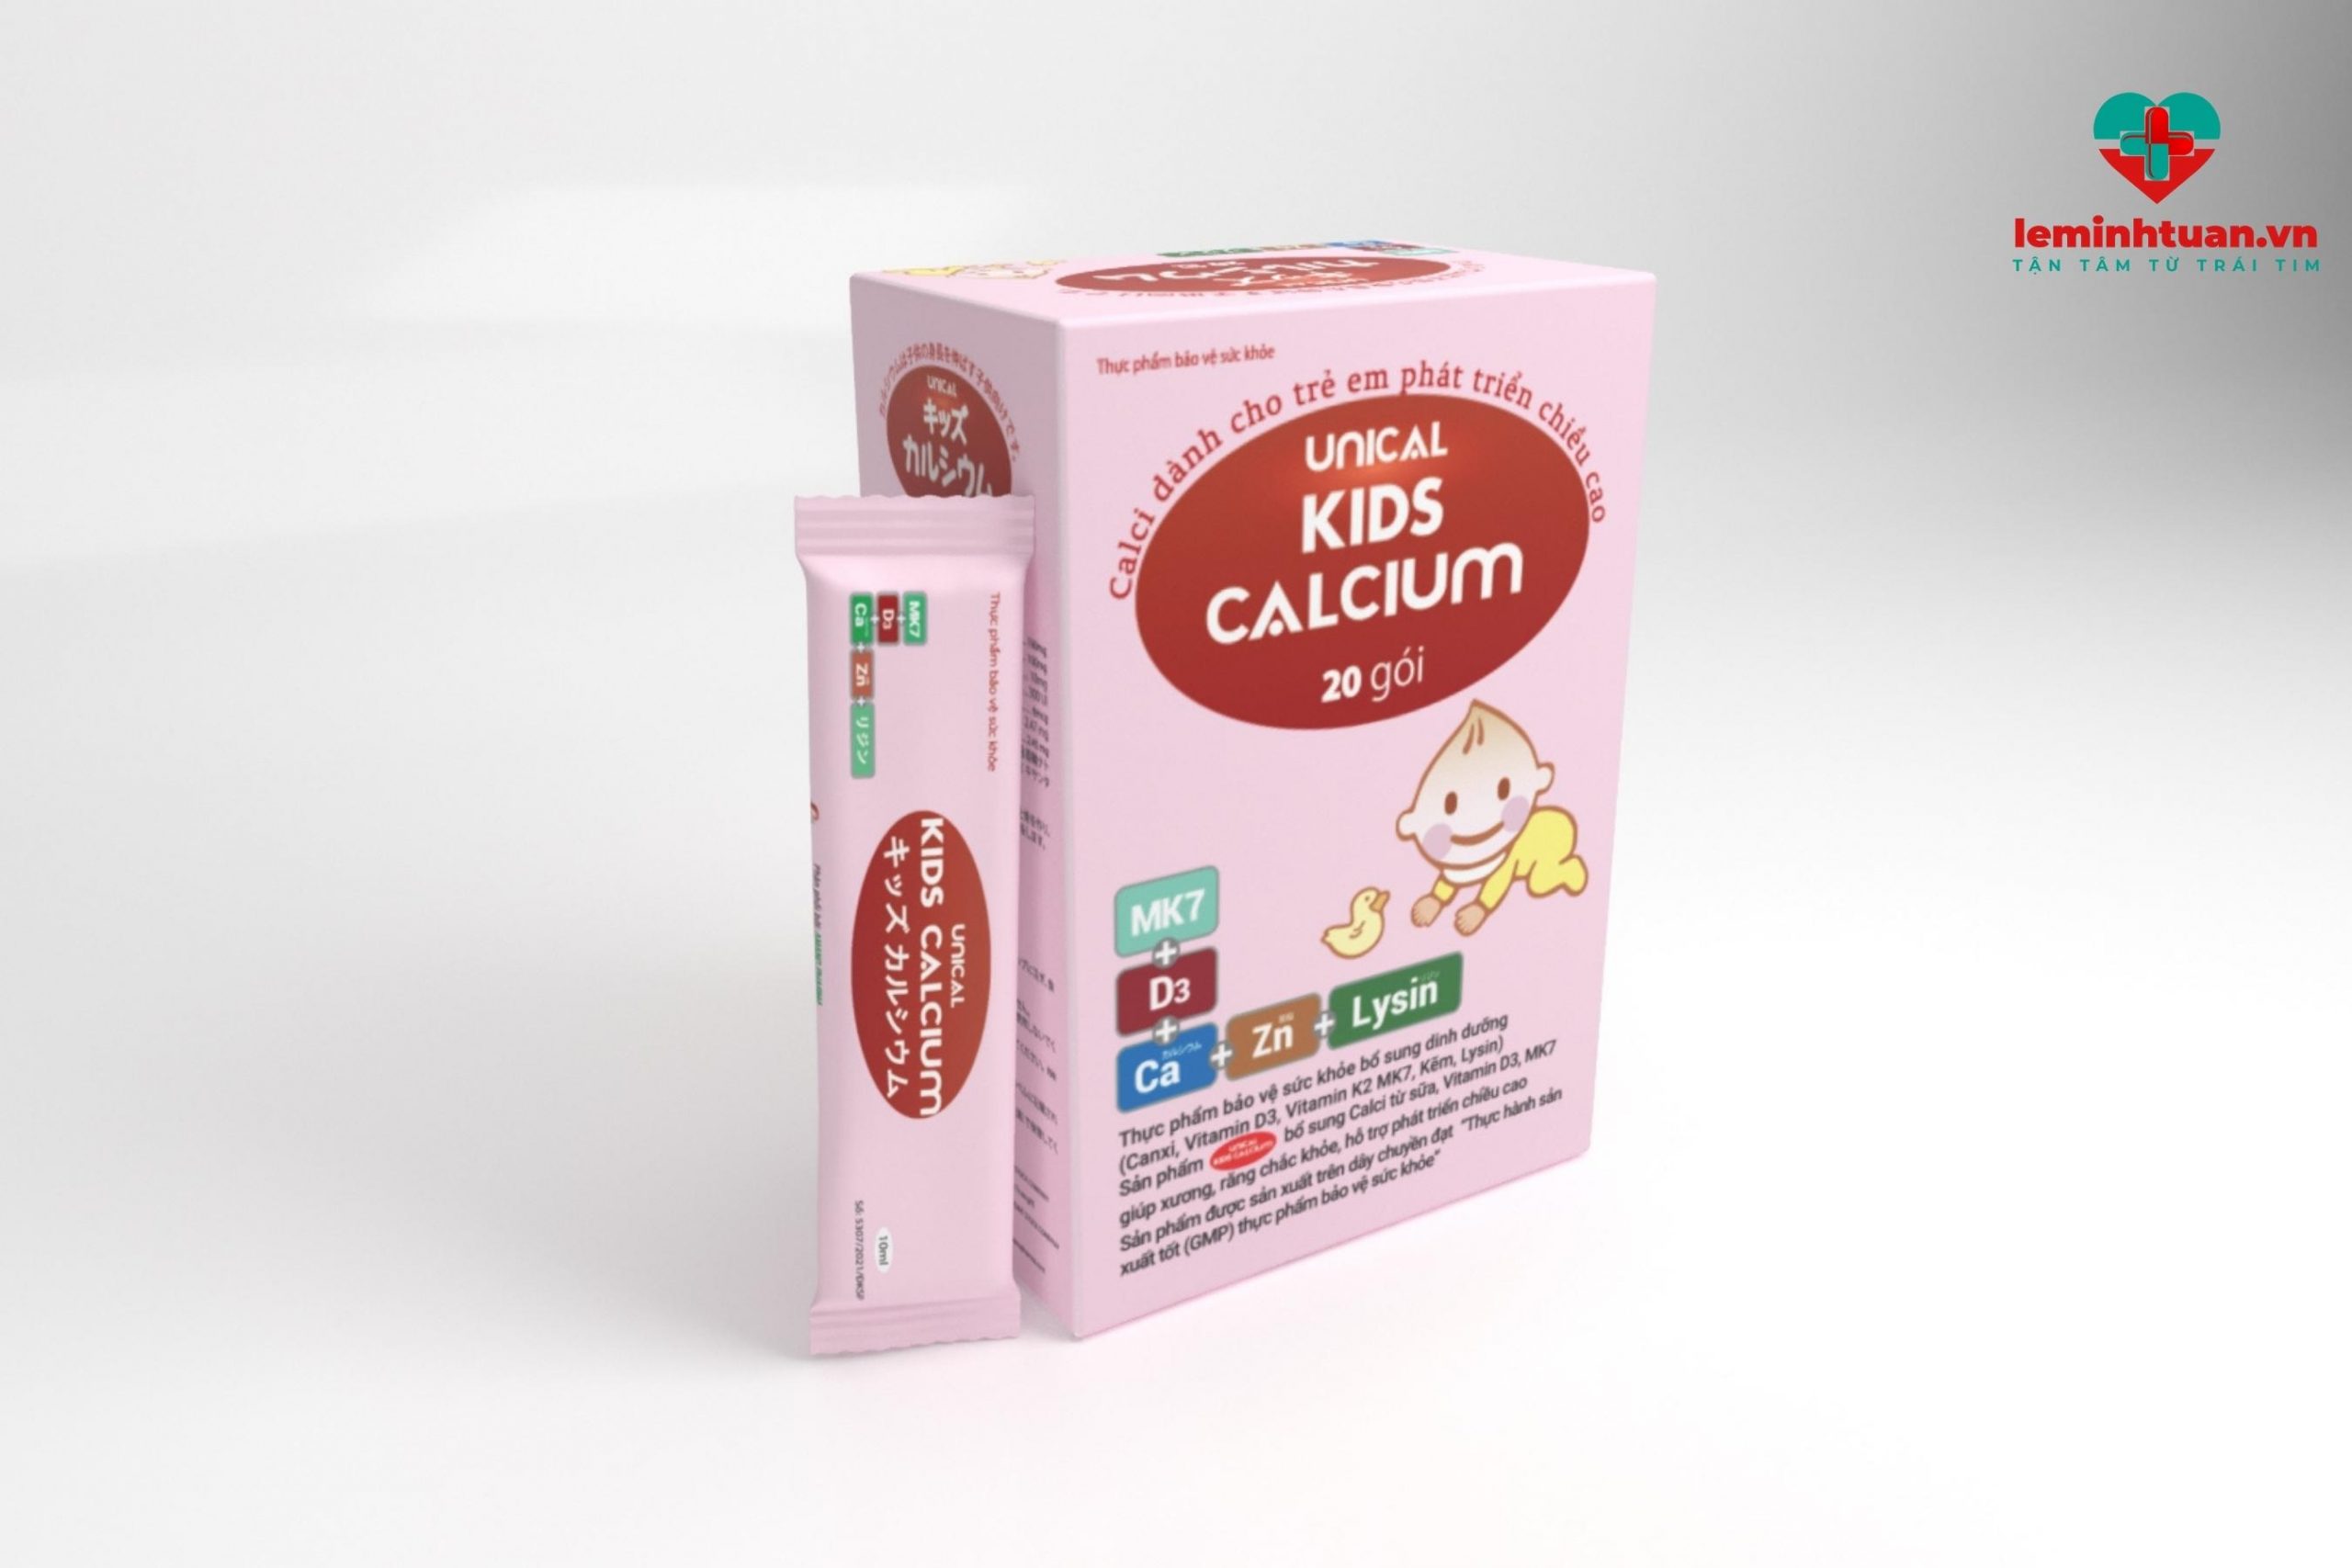 Unical Kids Calcium-thuốc canxi cho trẻ